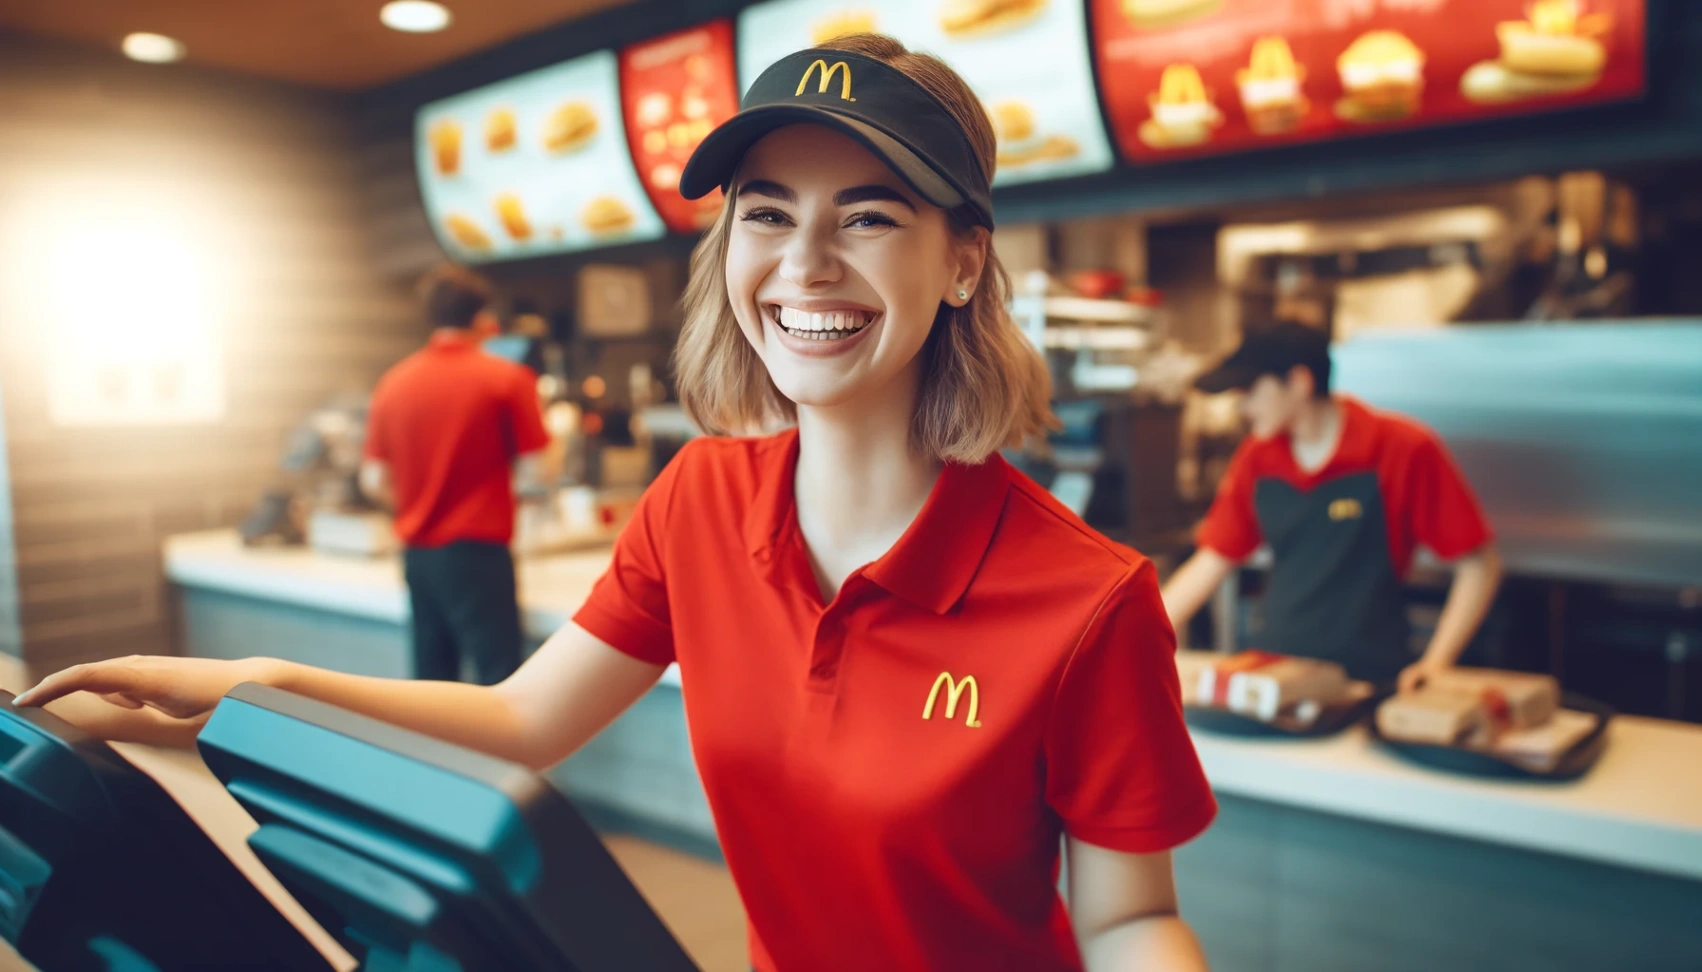 McDonald's Job Application: Your Gateway to Exciting Opportunities